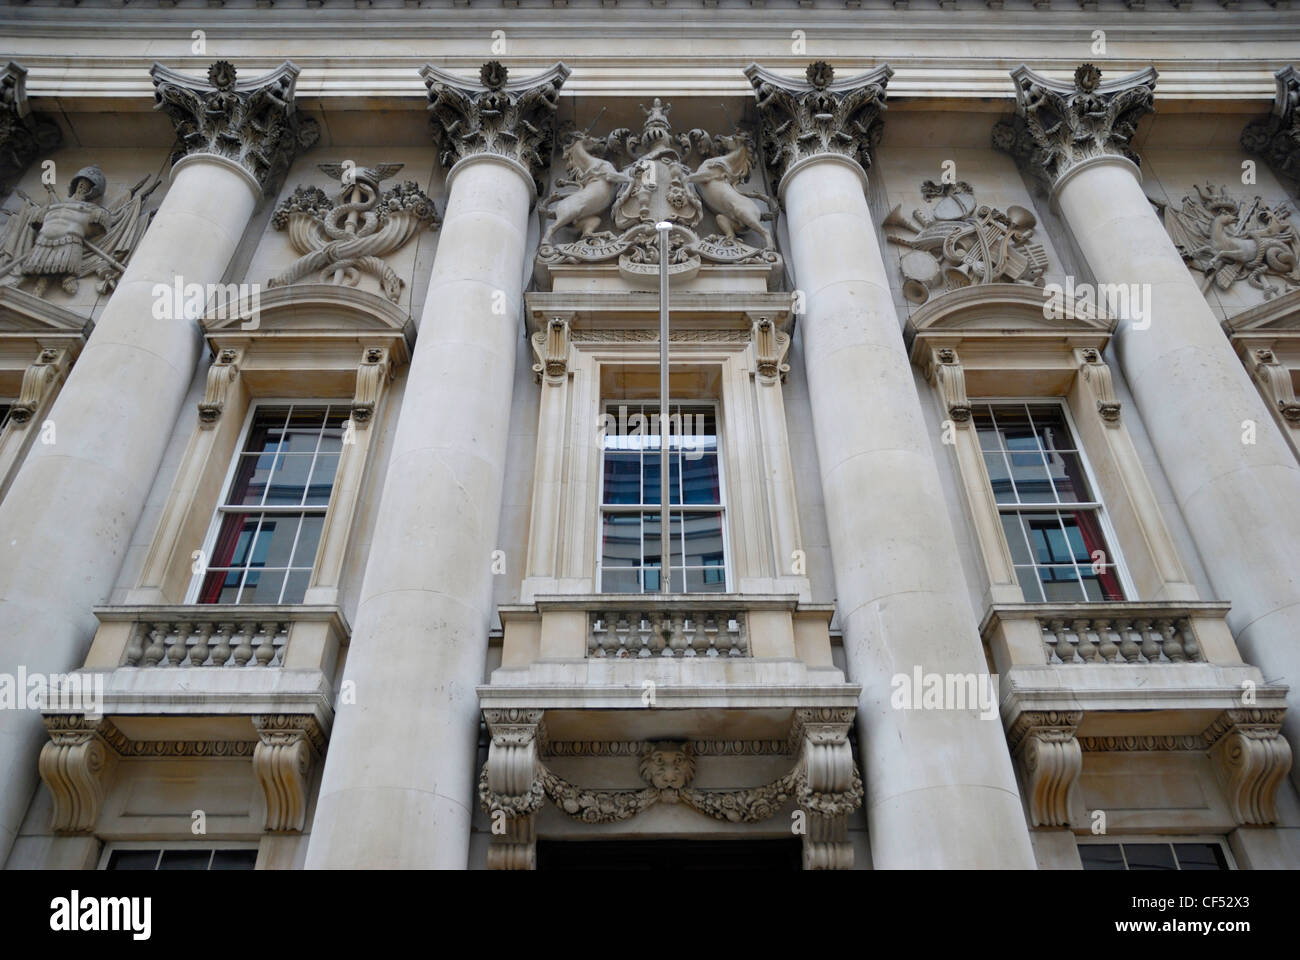 The facade of Goldsmiths' Hall, designed by Philip Hardwick and opened in 1835. Stock Photo